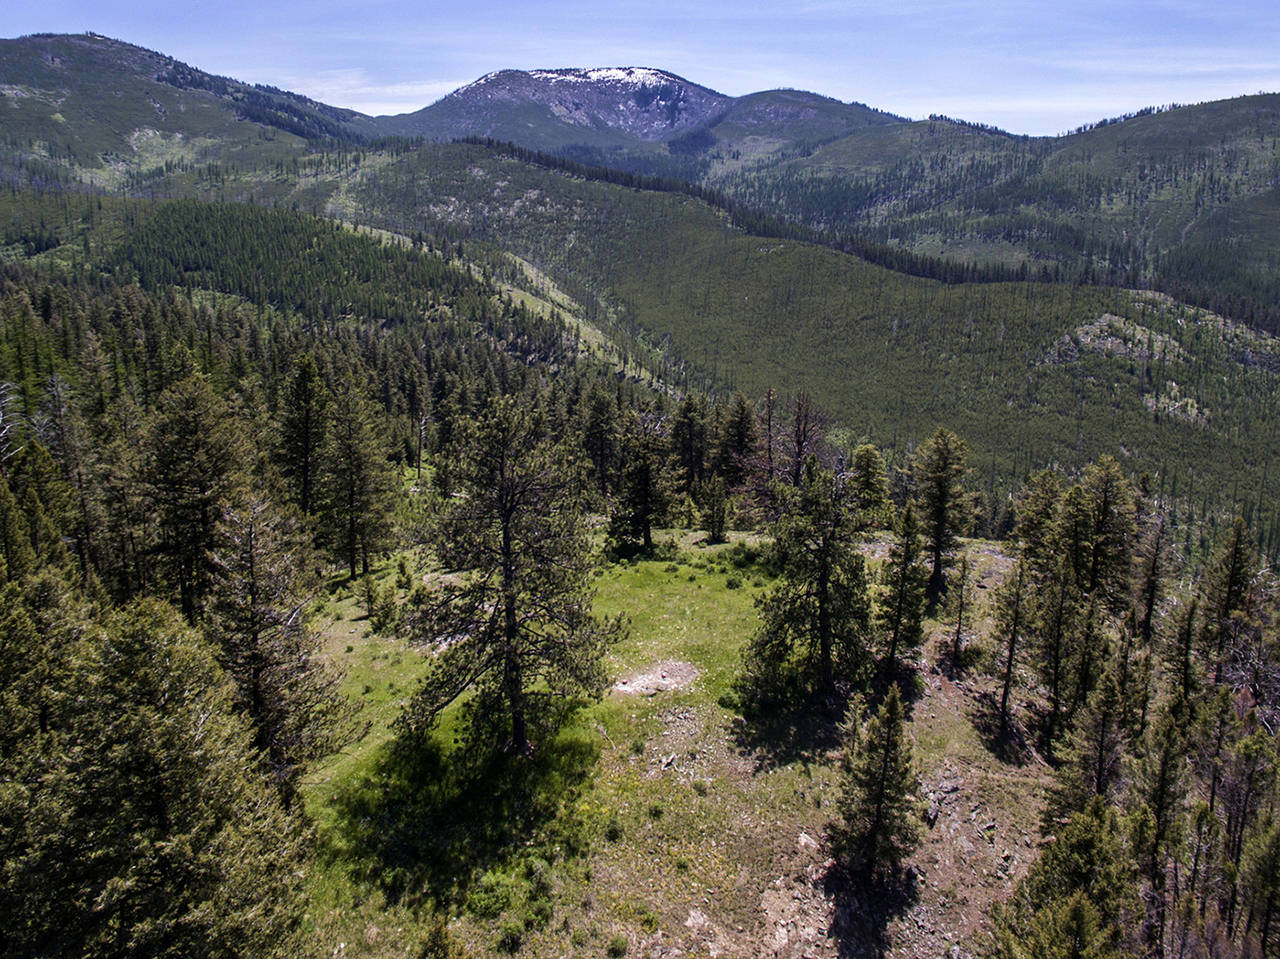 This June 7 photo shows the Colville National Forest. (Steve Ringman/The Seattle Times via AP)